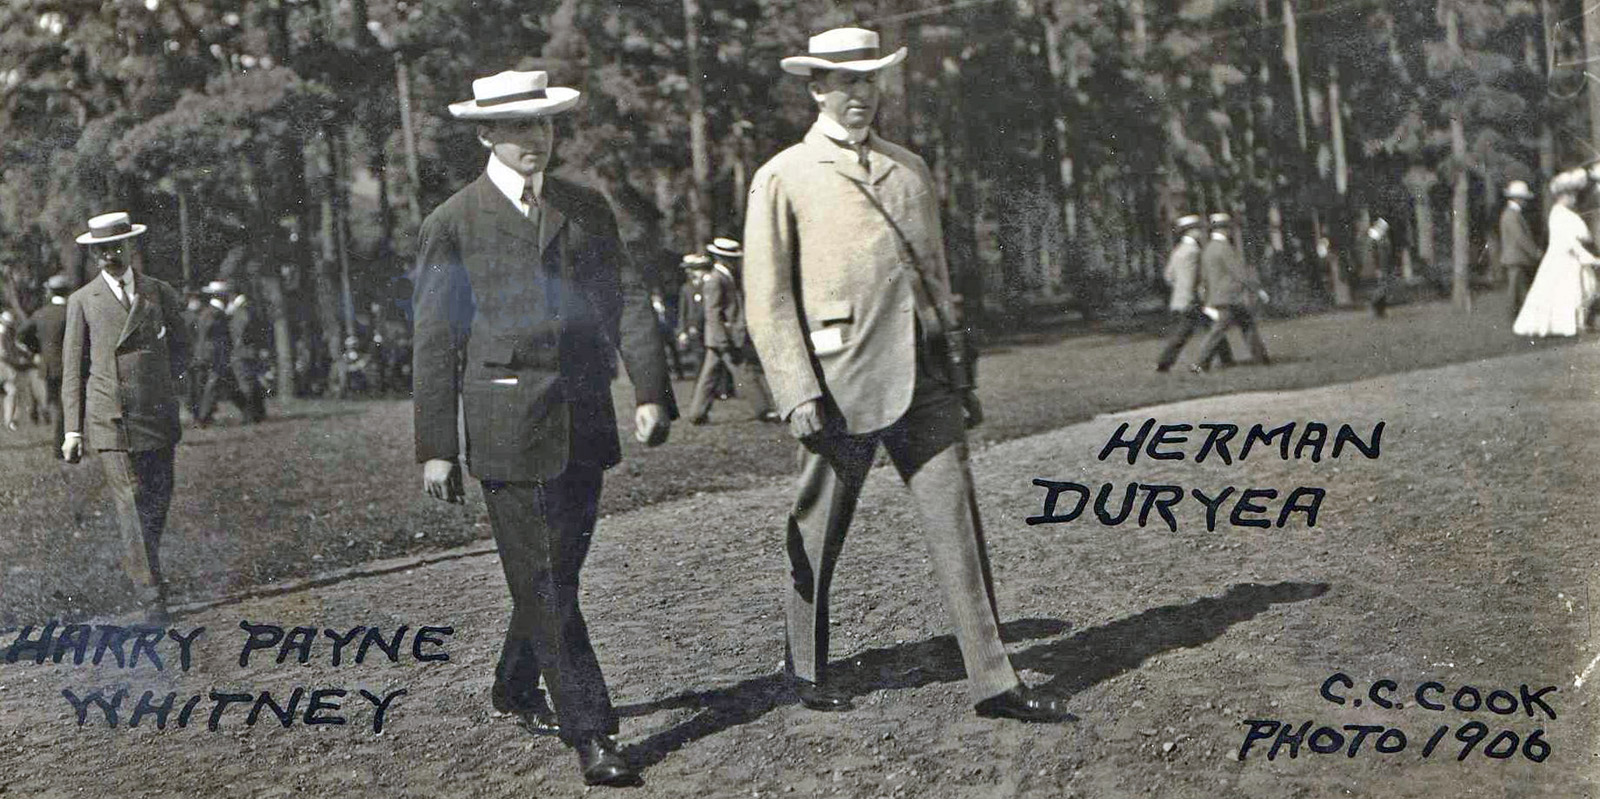 Harry Payne Whitney and Herman Duryea in 1906 (C. C. Cook/Museum Collection)